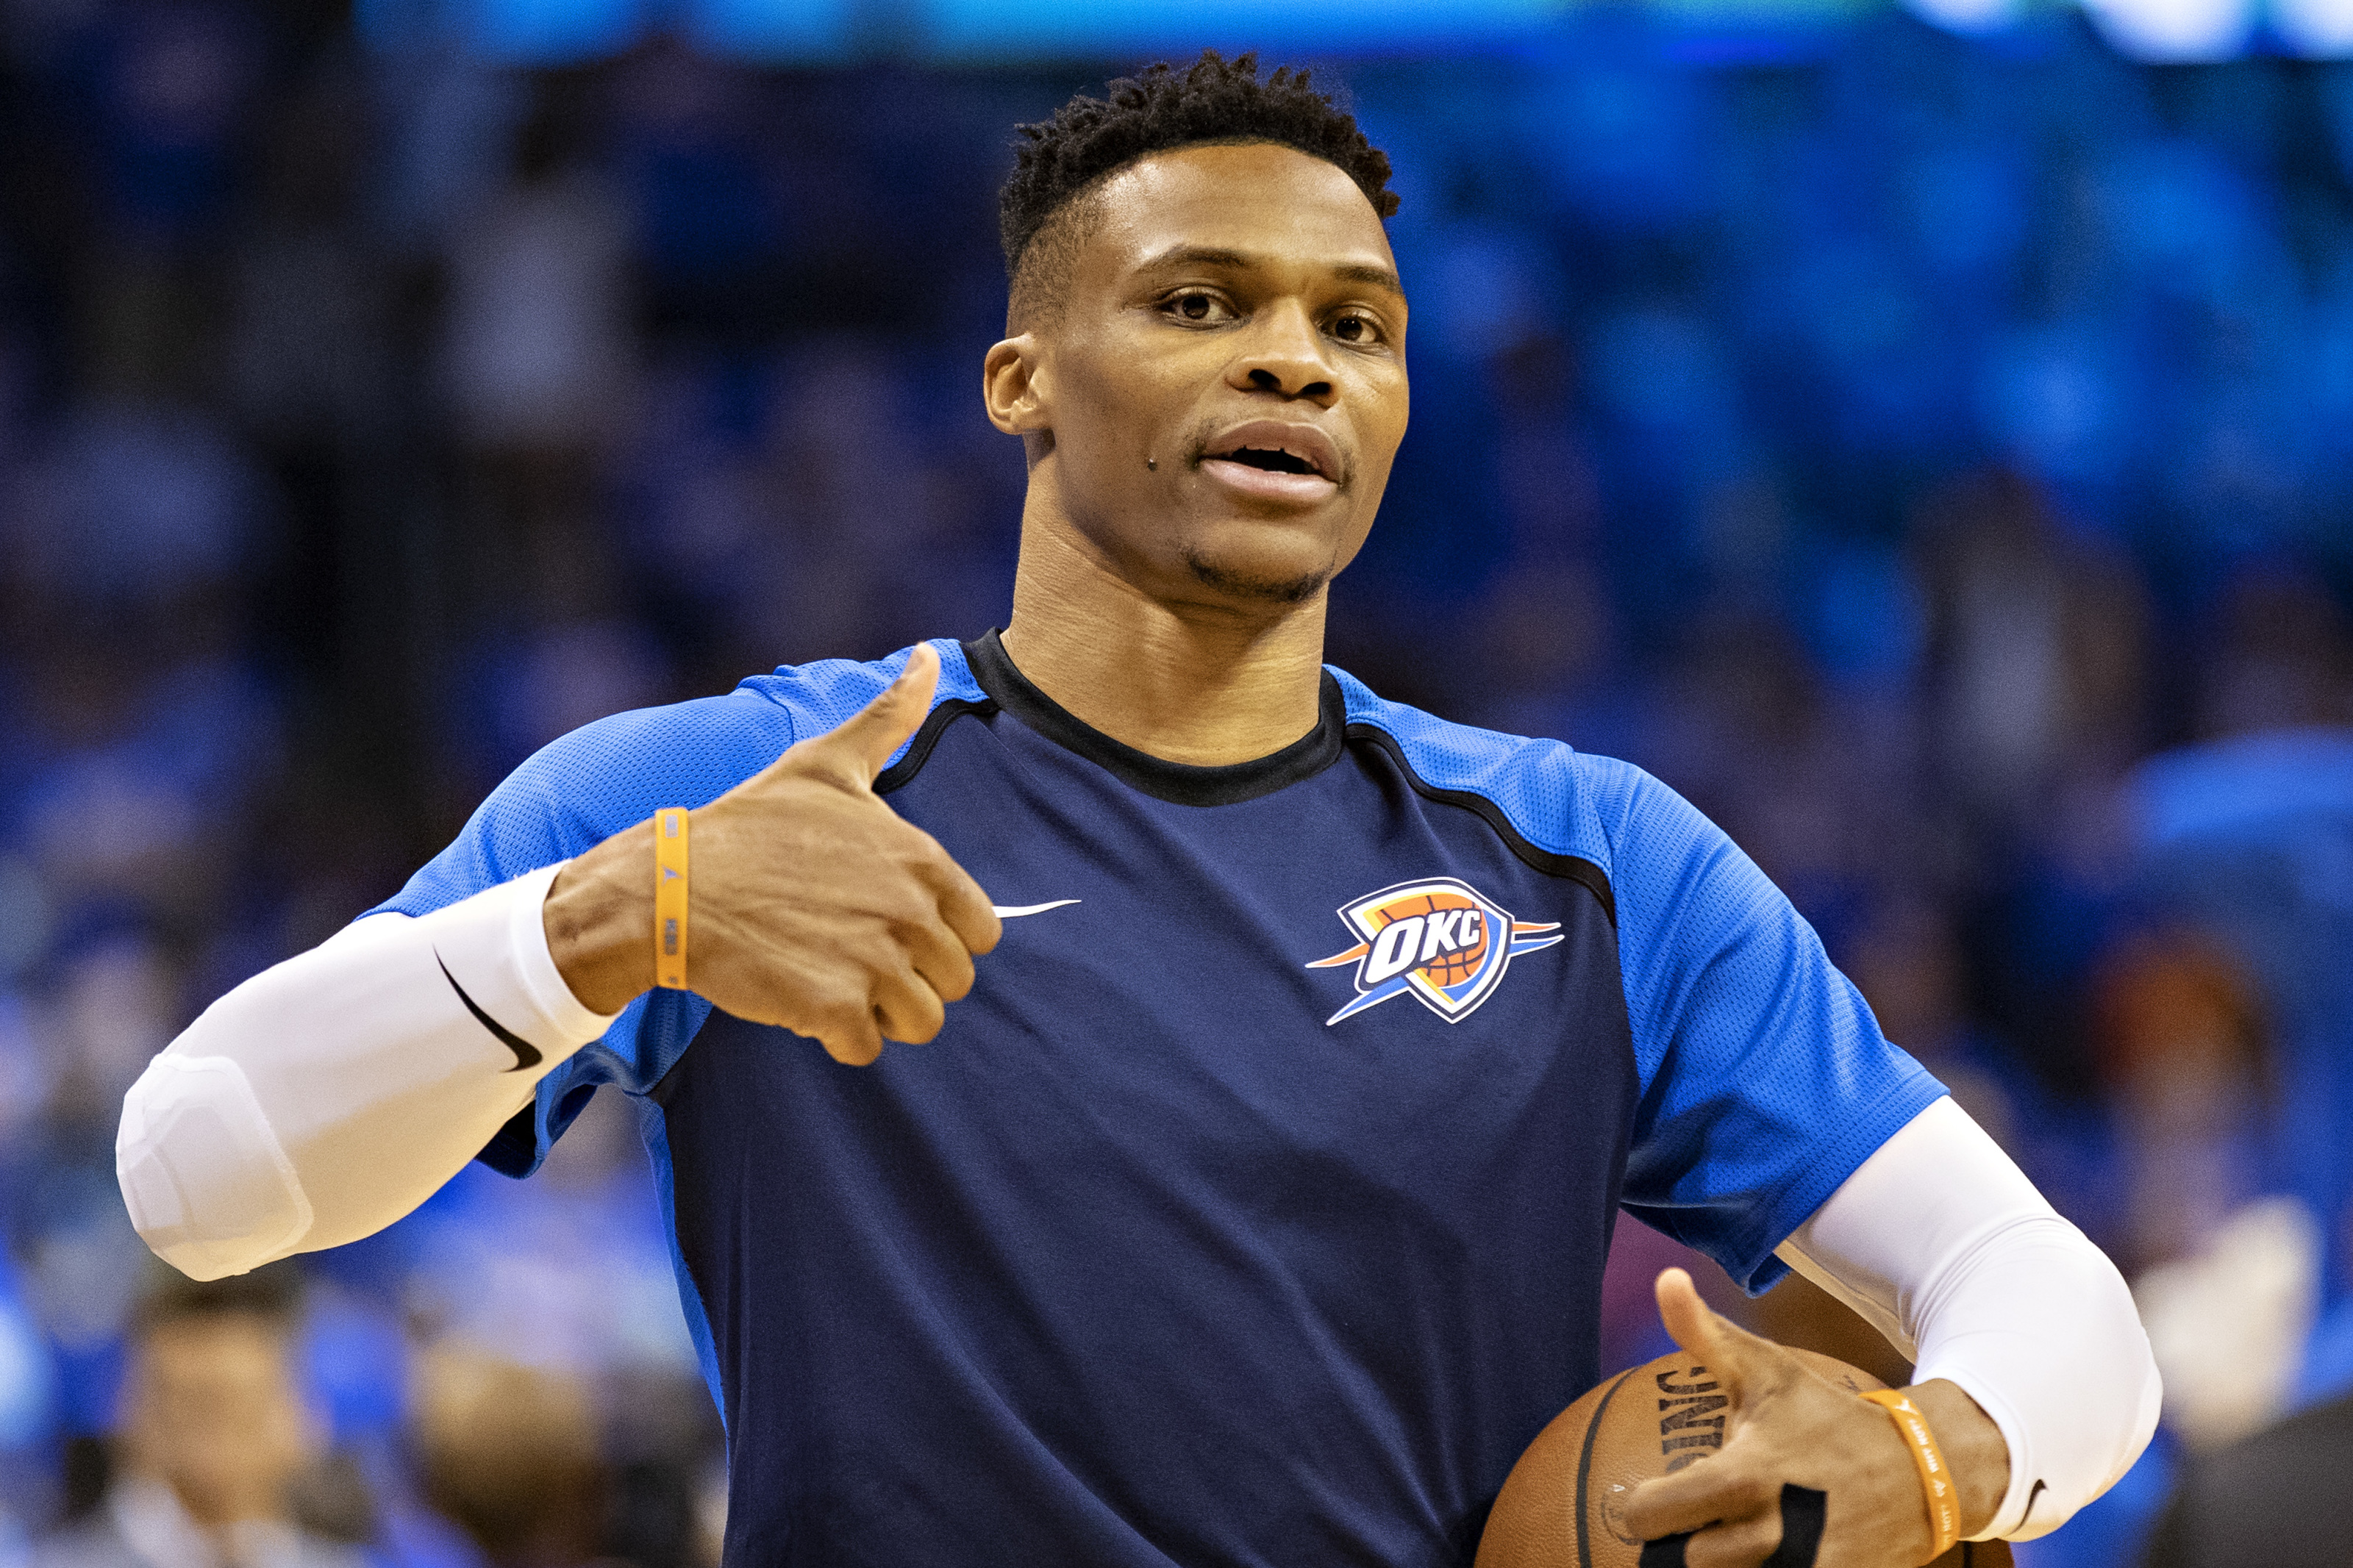 VN Design - Crazy prediction: Russell Westbrook leaves Oklahoma